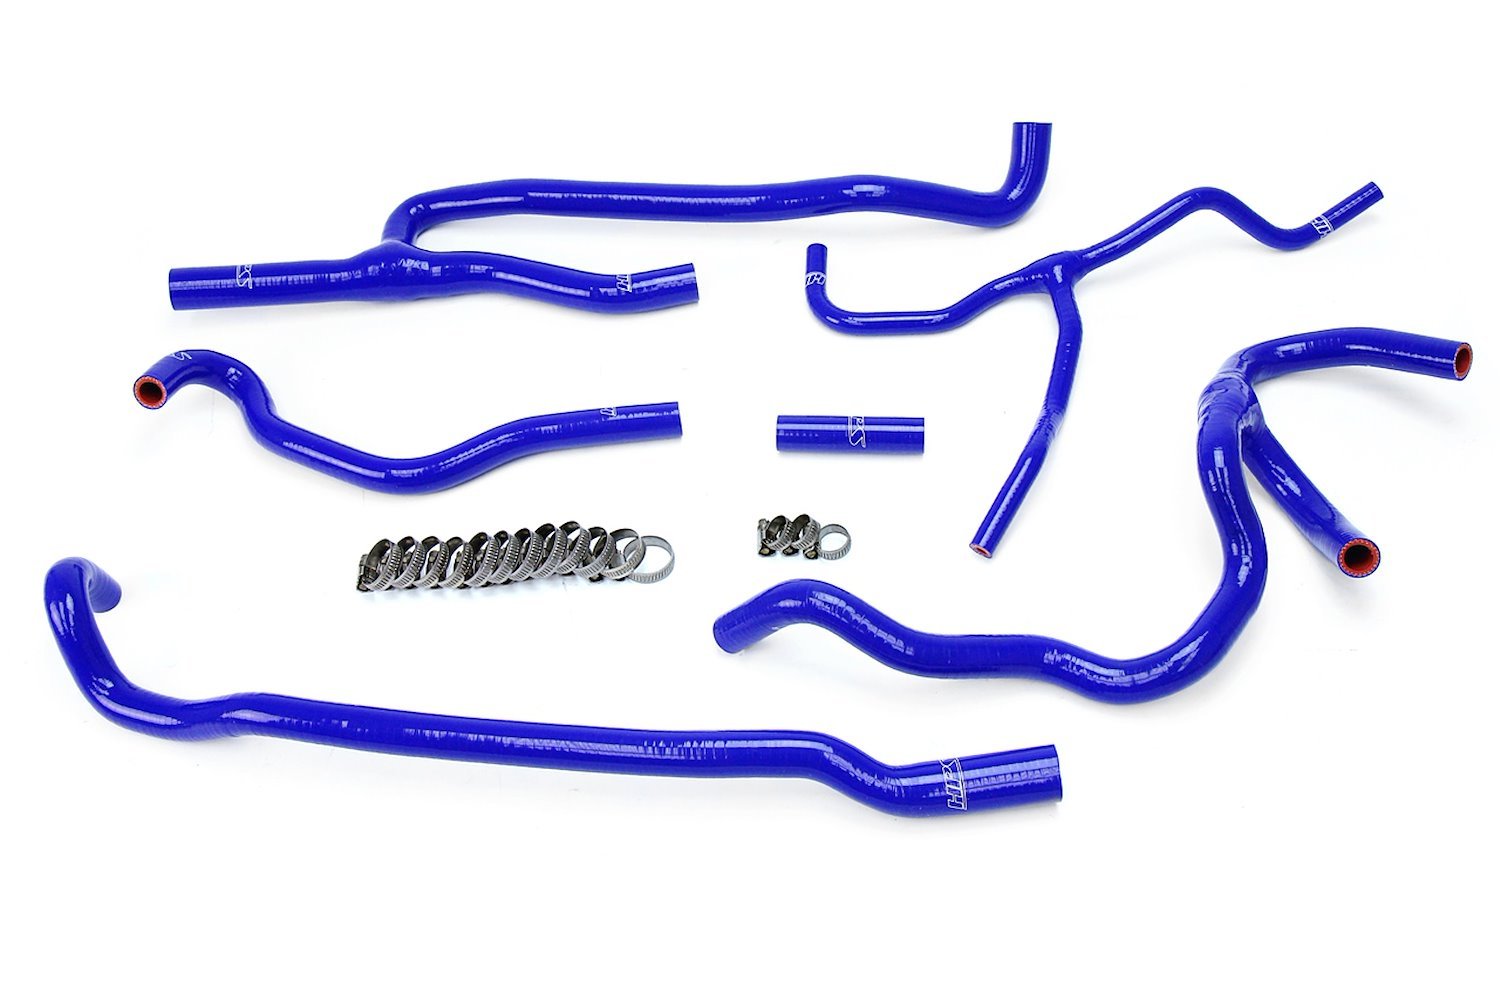 57-1660-BLUE Heater Hose Kit, High-Temp 3-Ply Reinforced Silicone, Replace OEM Rubber Heater Coolant Hoses